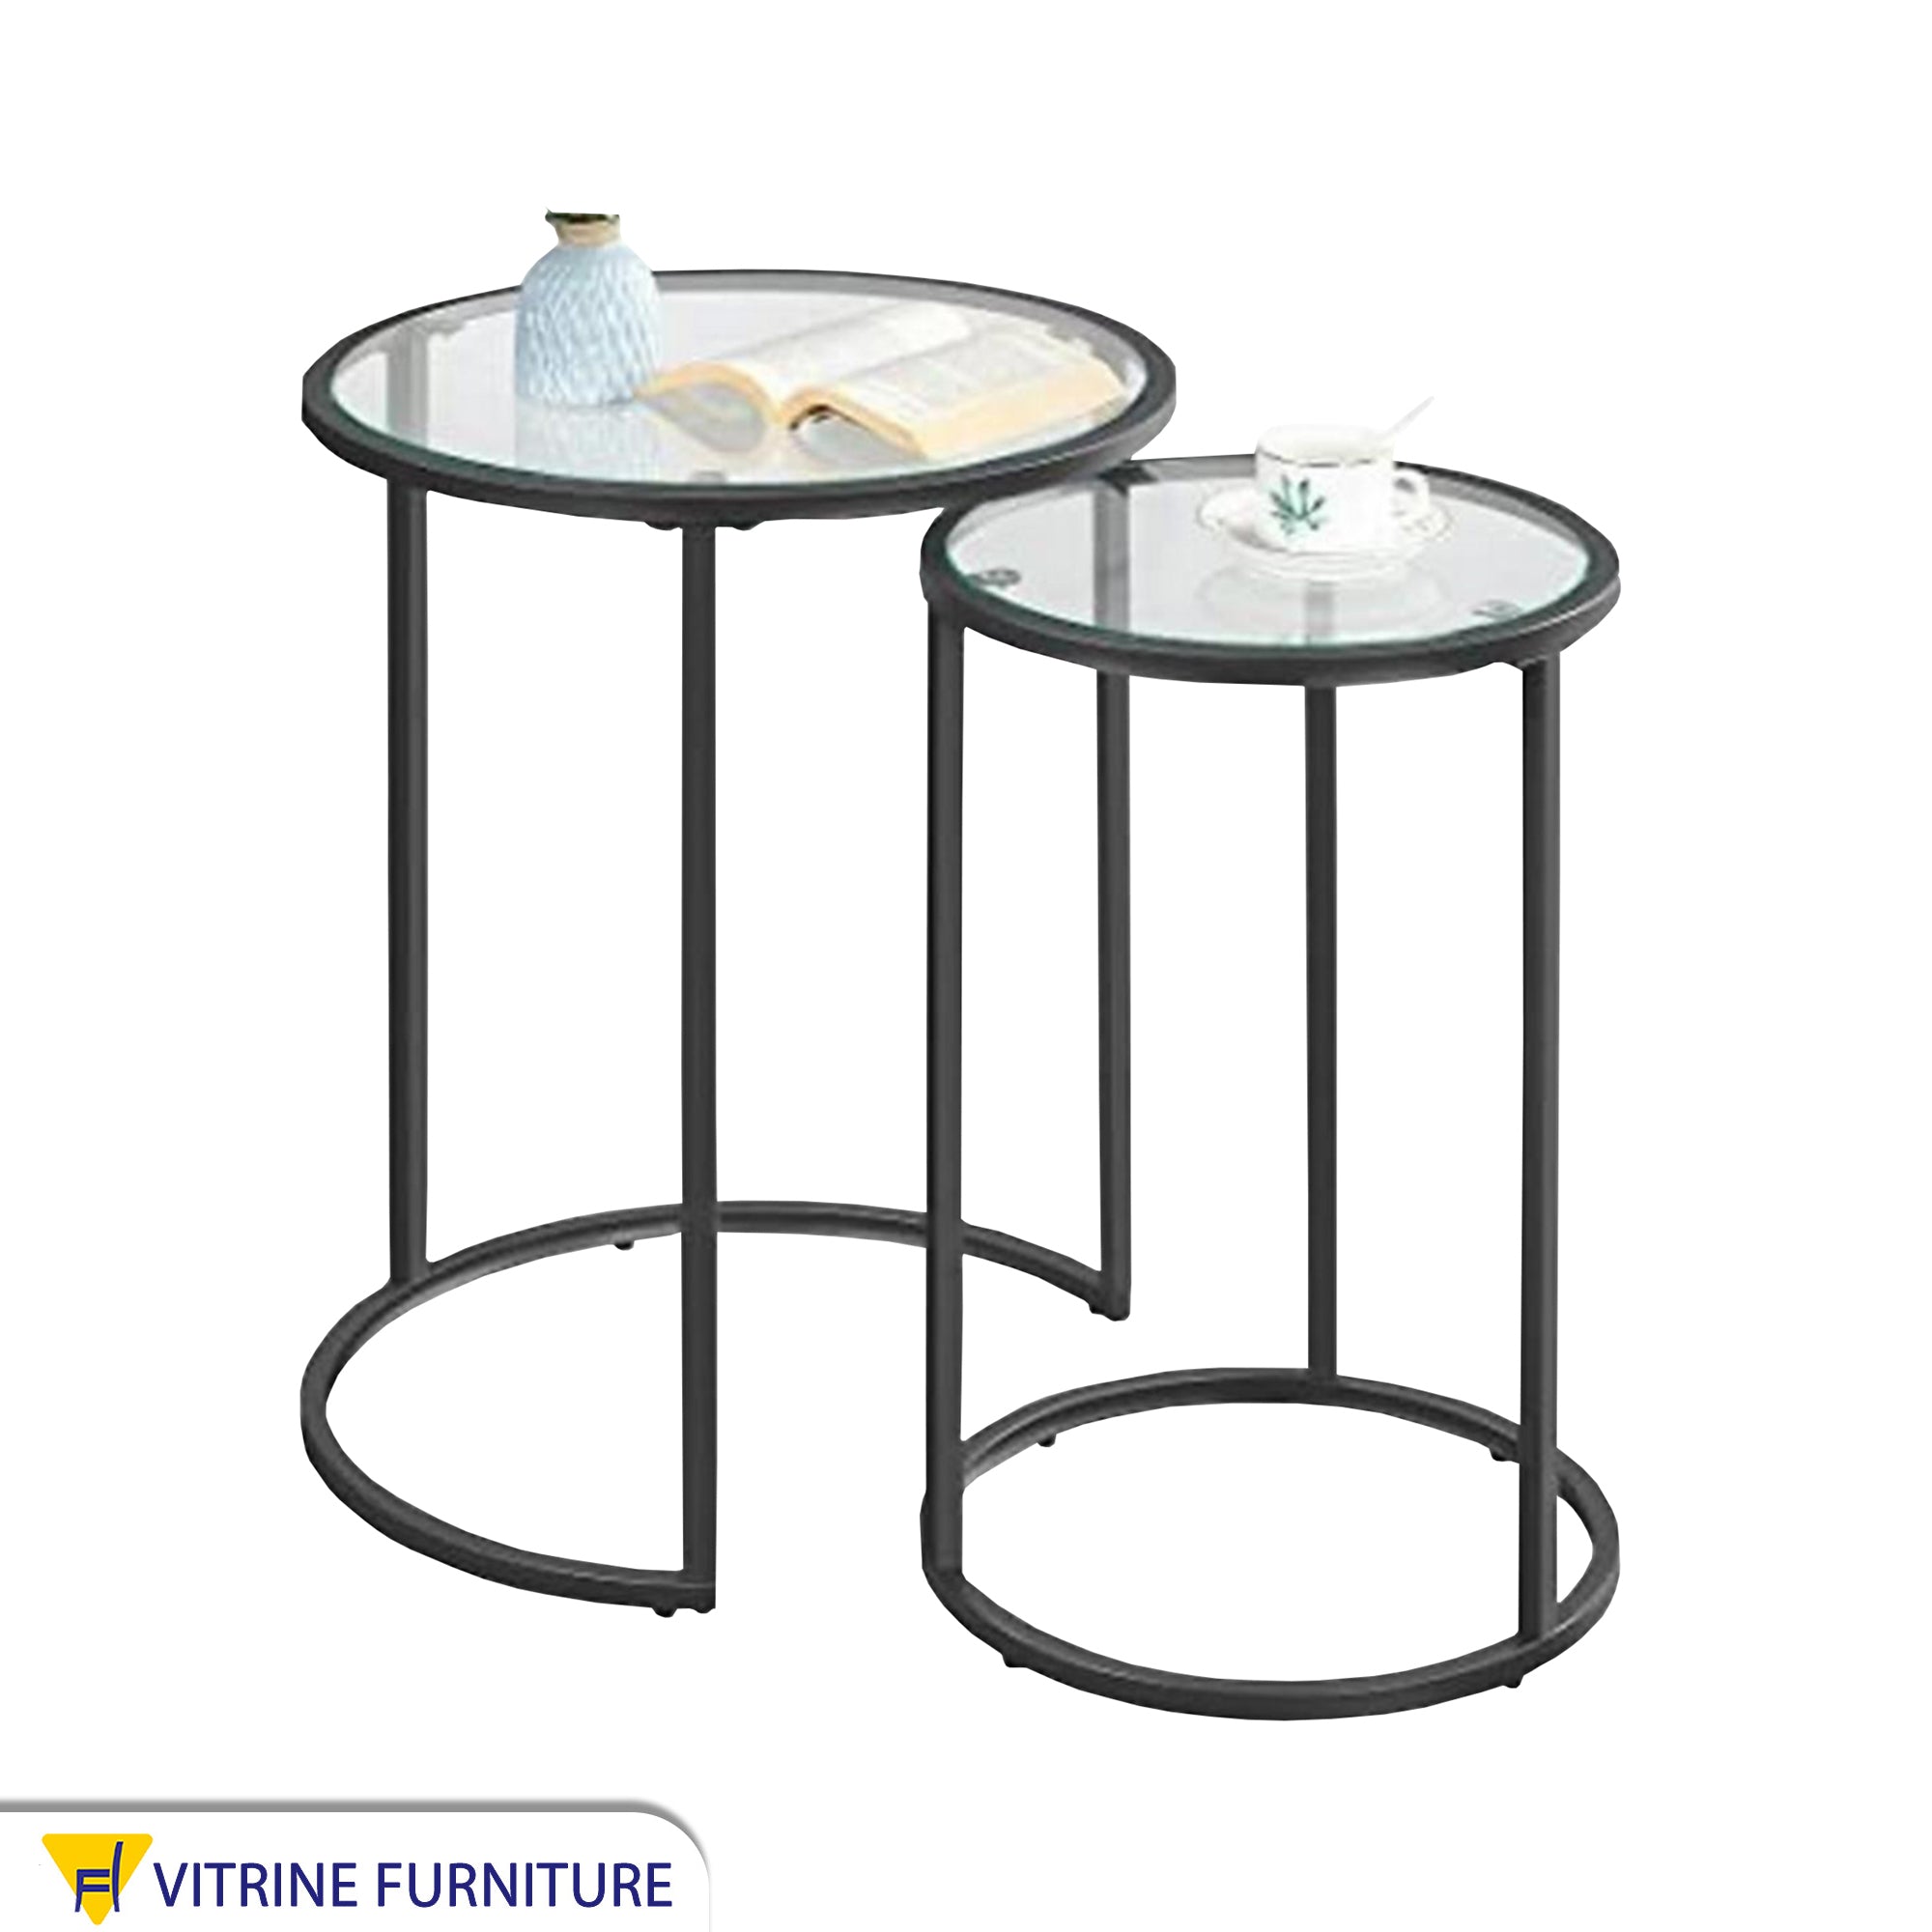 2 nested tables in black